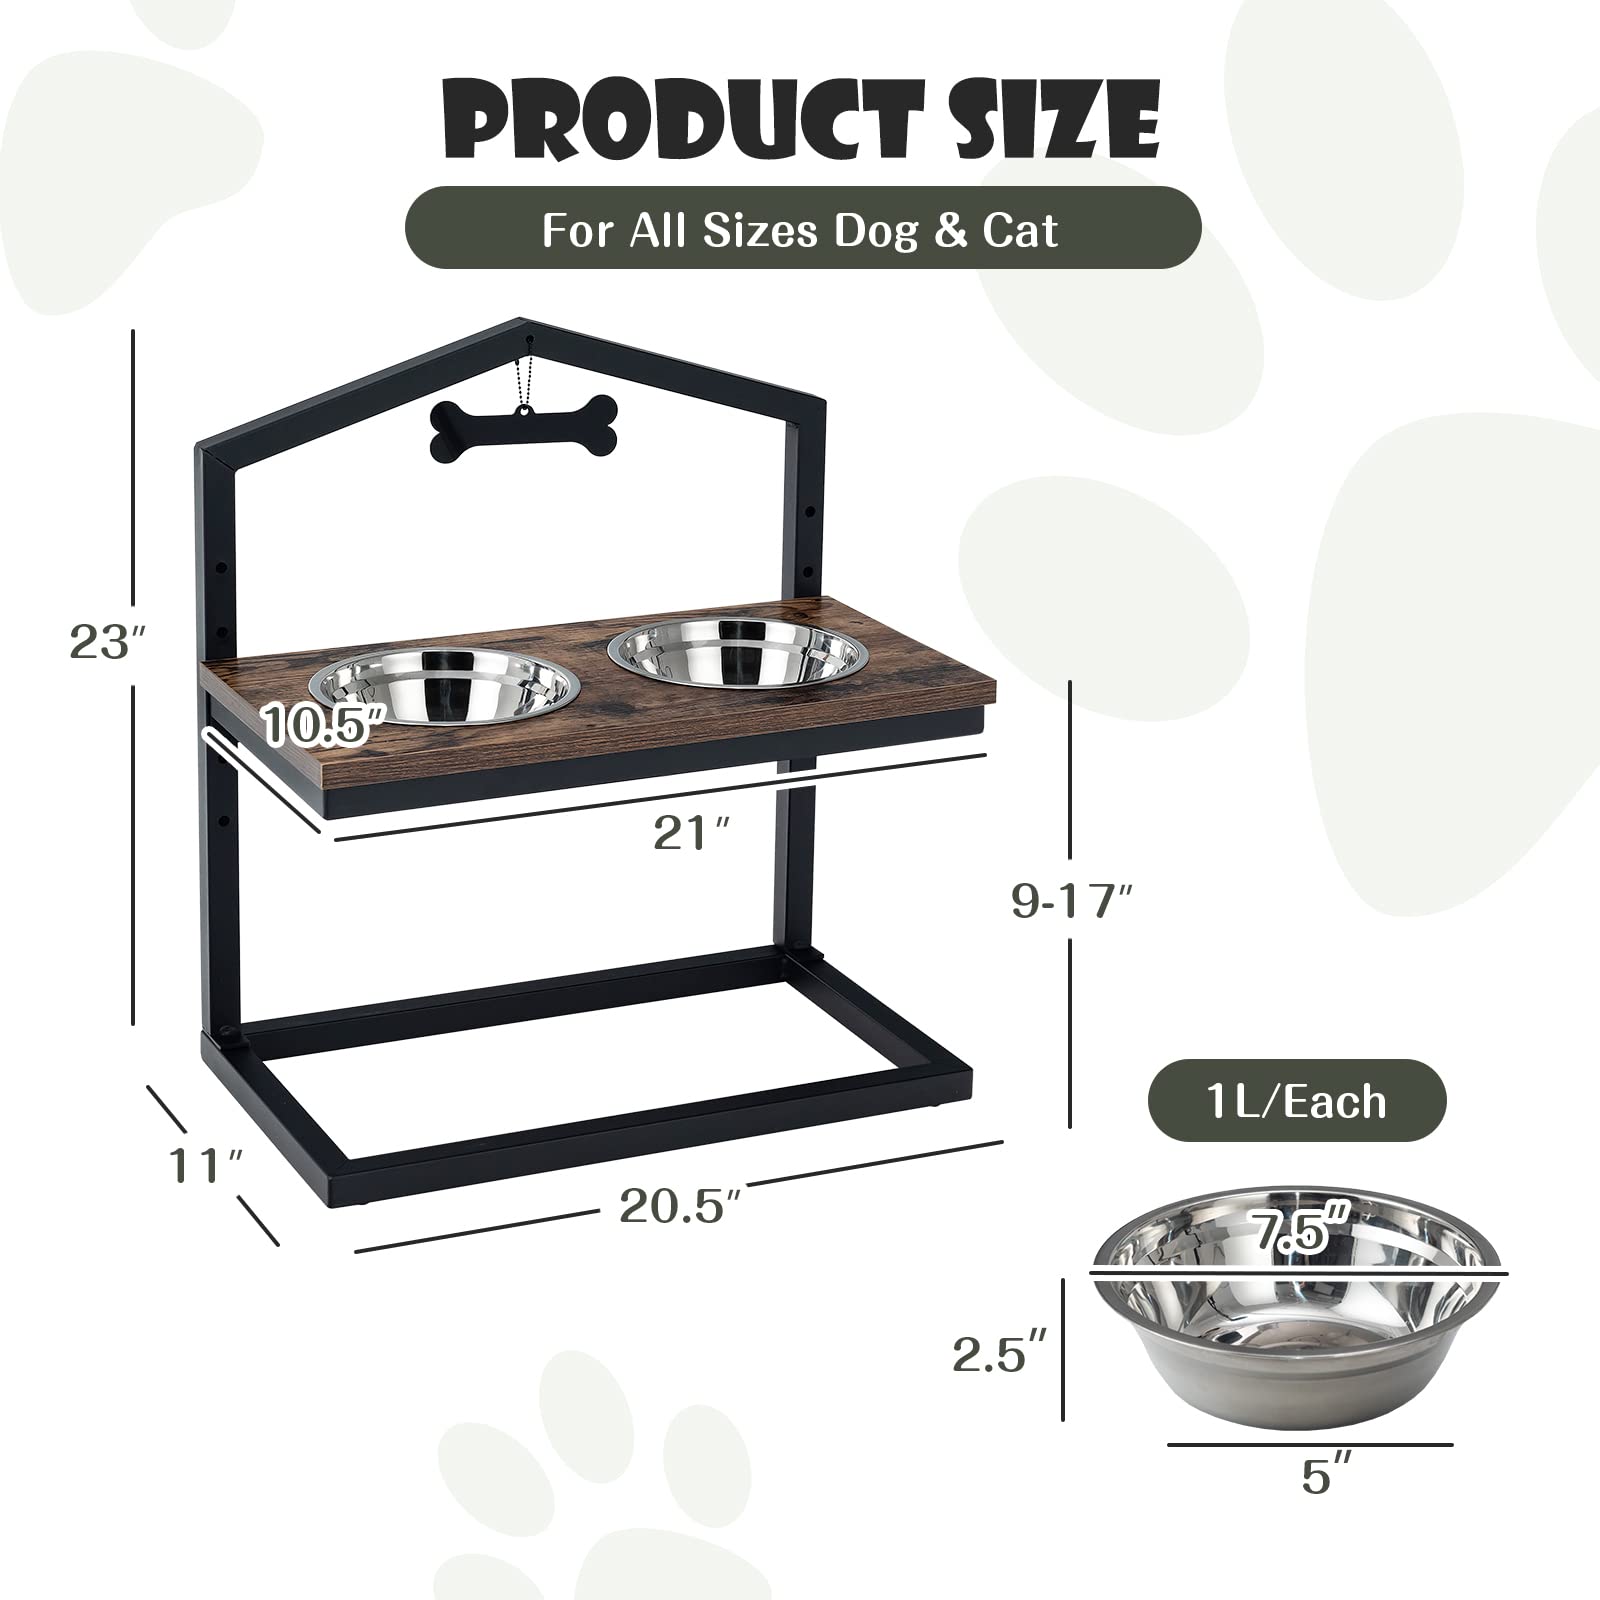 Giantex Elevated Dog Bowls Stand, 5 Adjustable Heights, 2 Stainless Steel Bowls